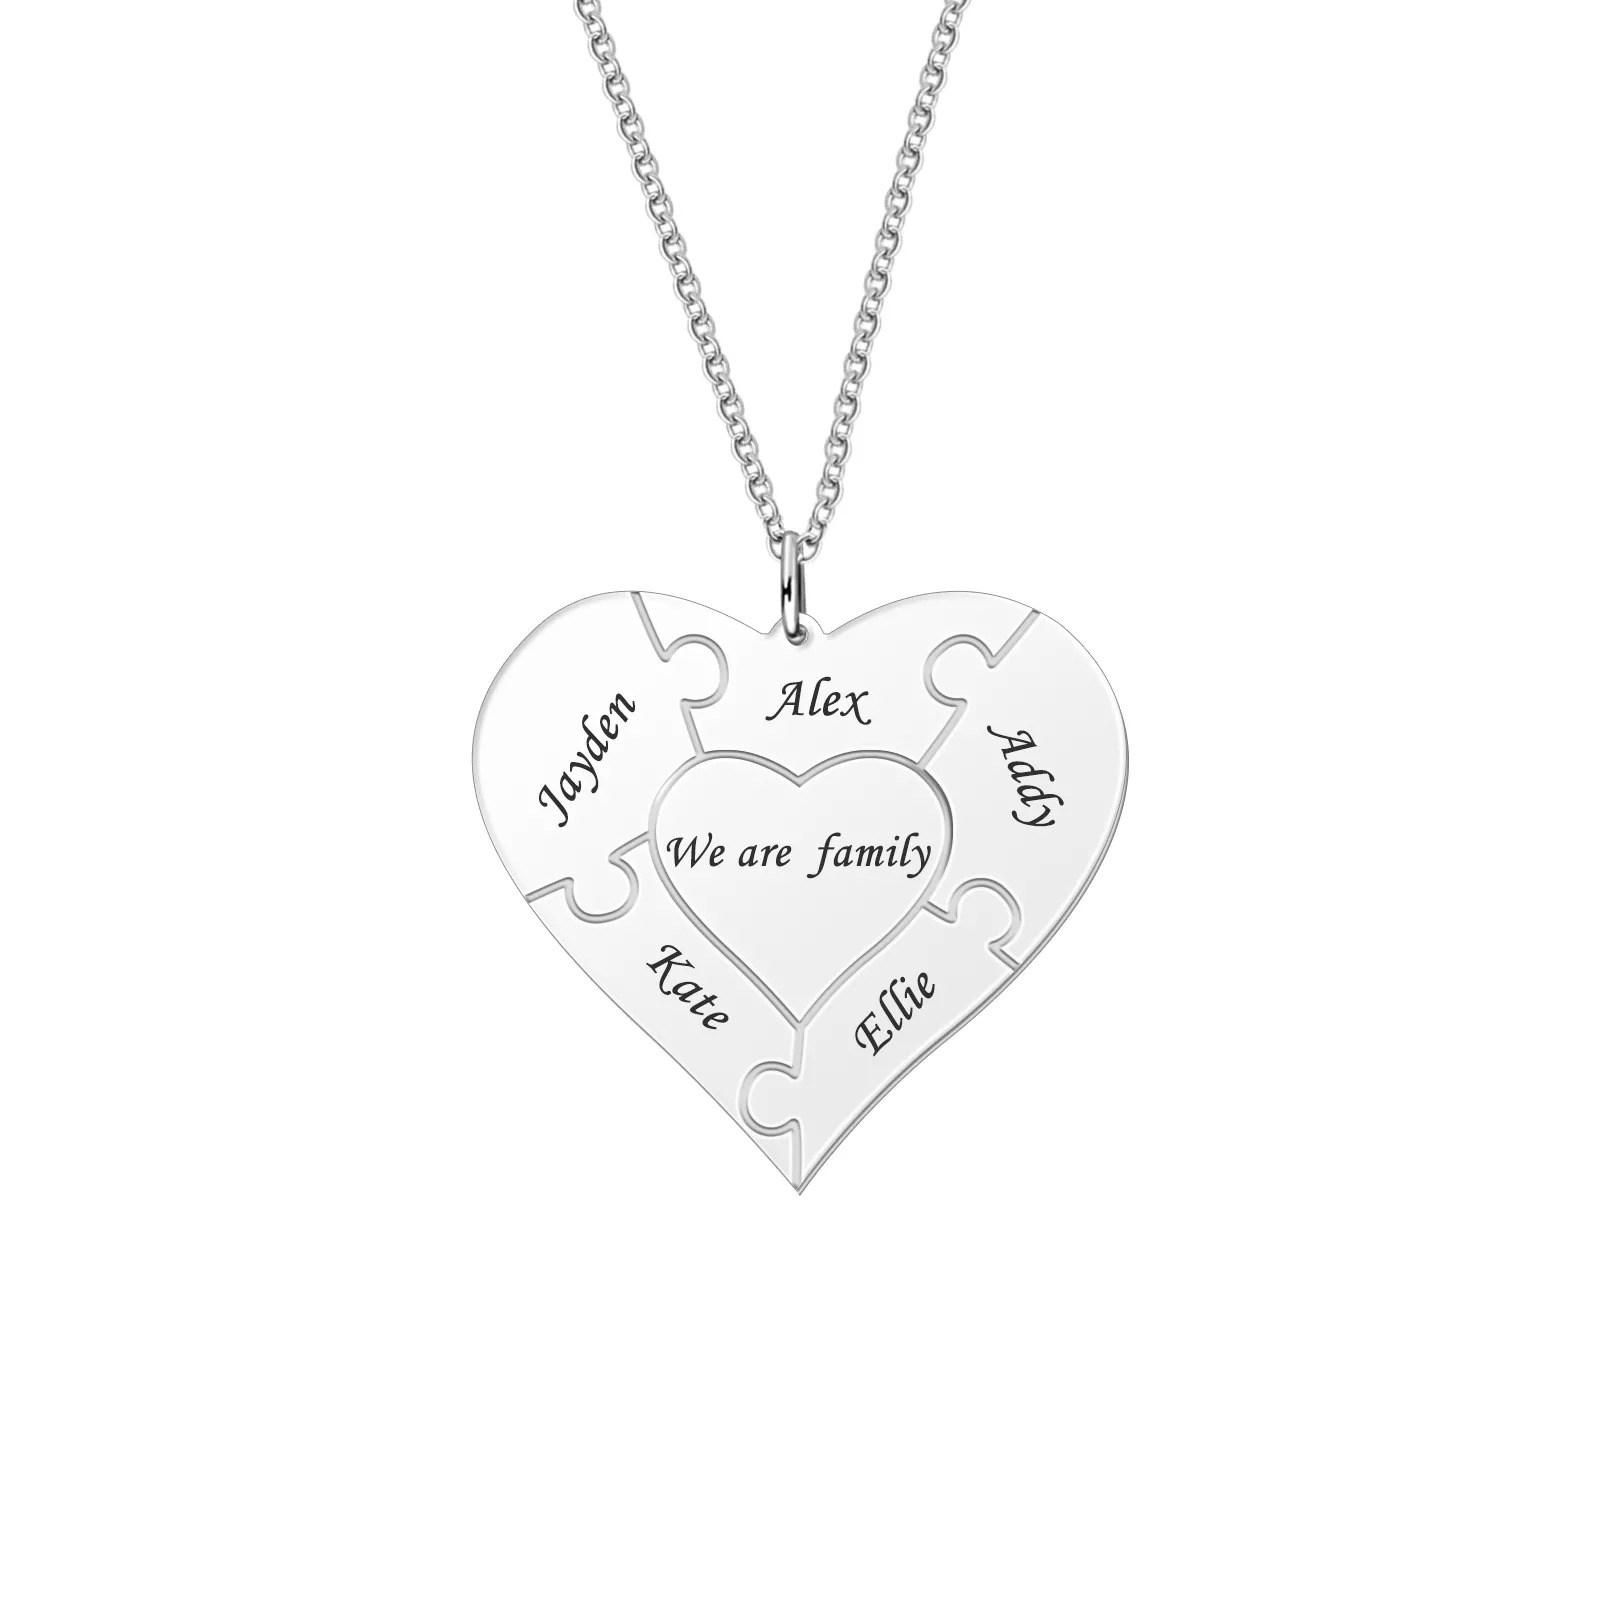 Personalized Love Heart Necklace Puzzle Necklace with Engraving Names